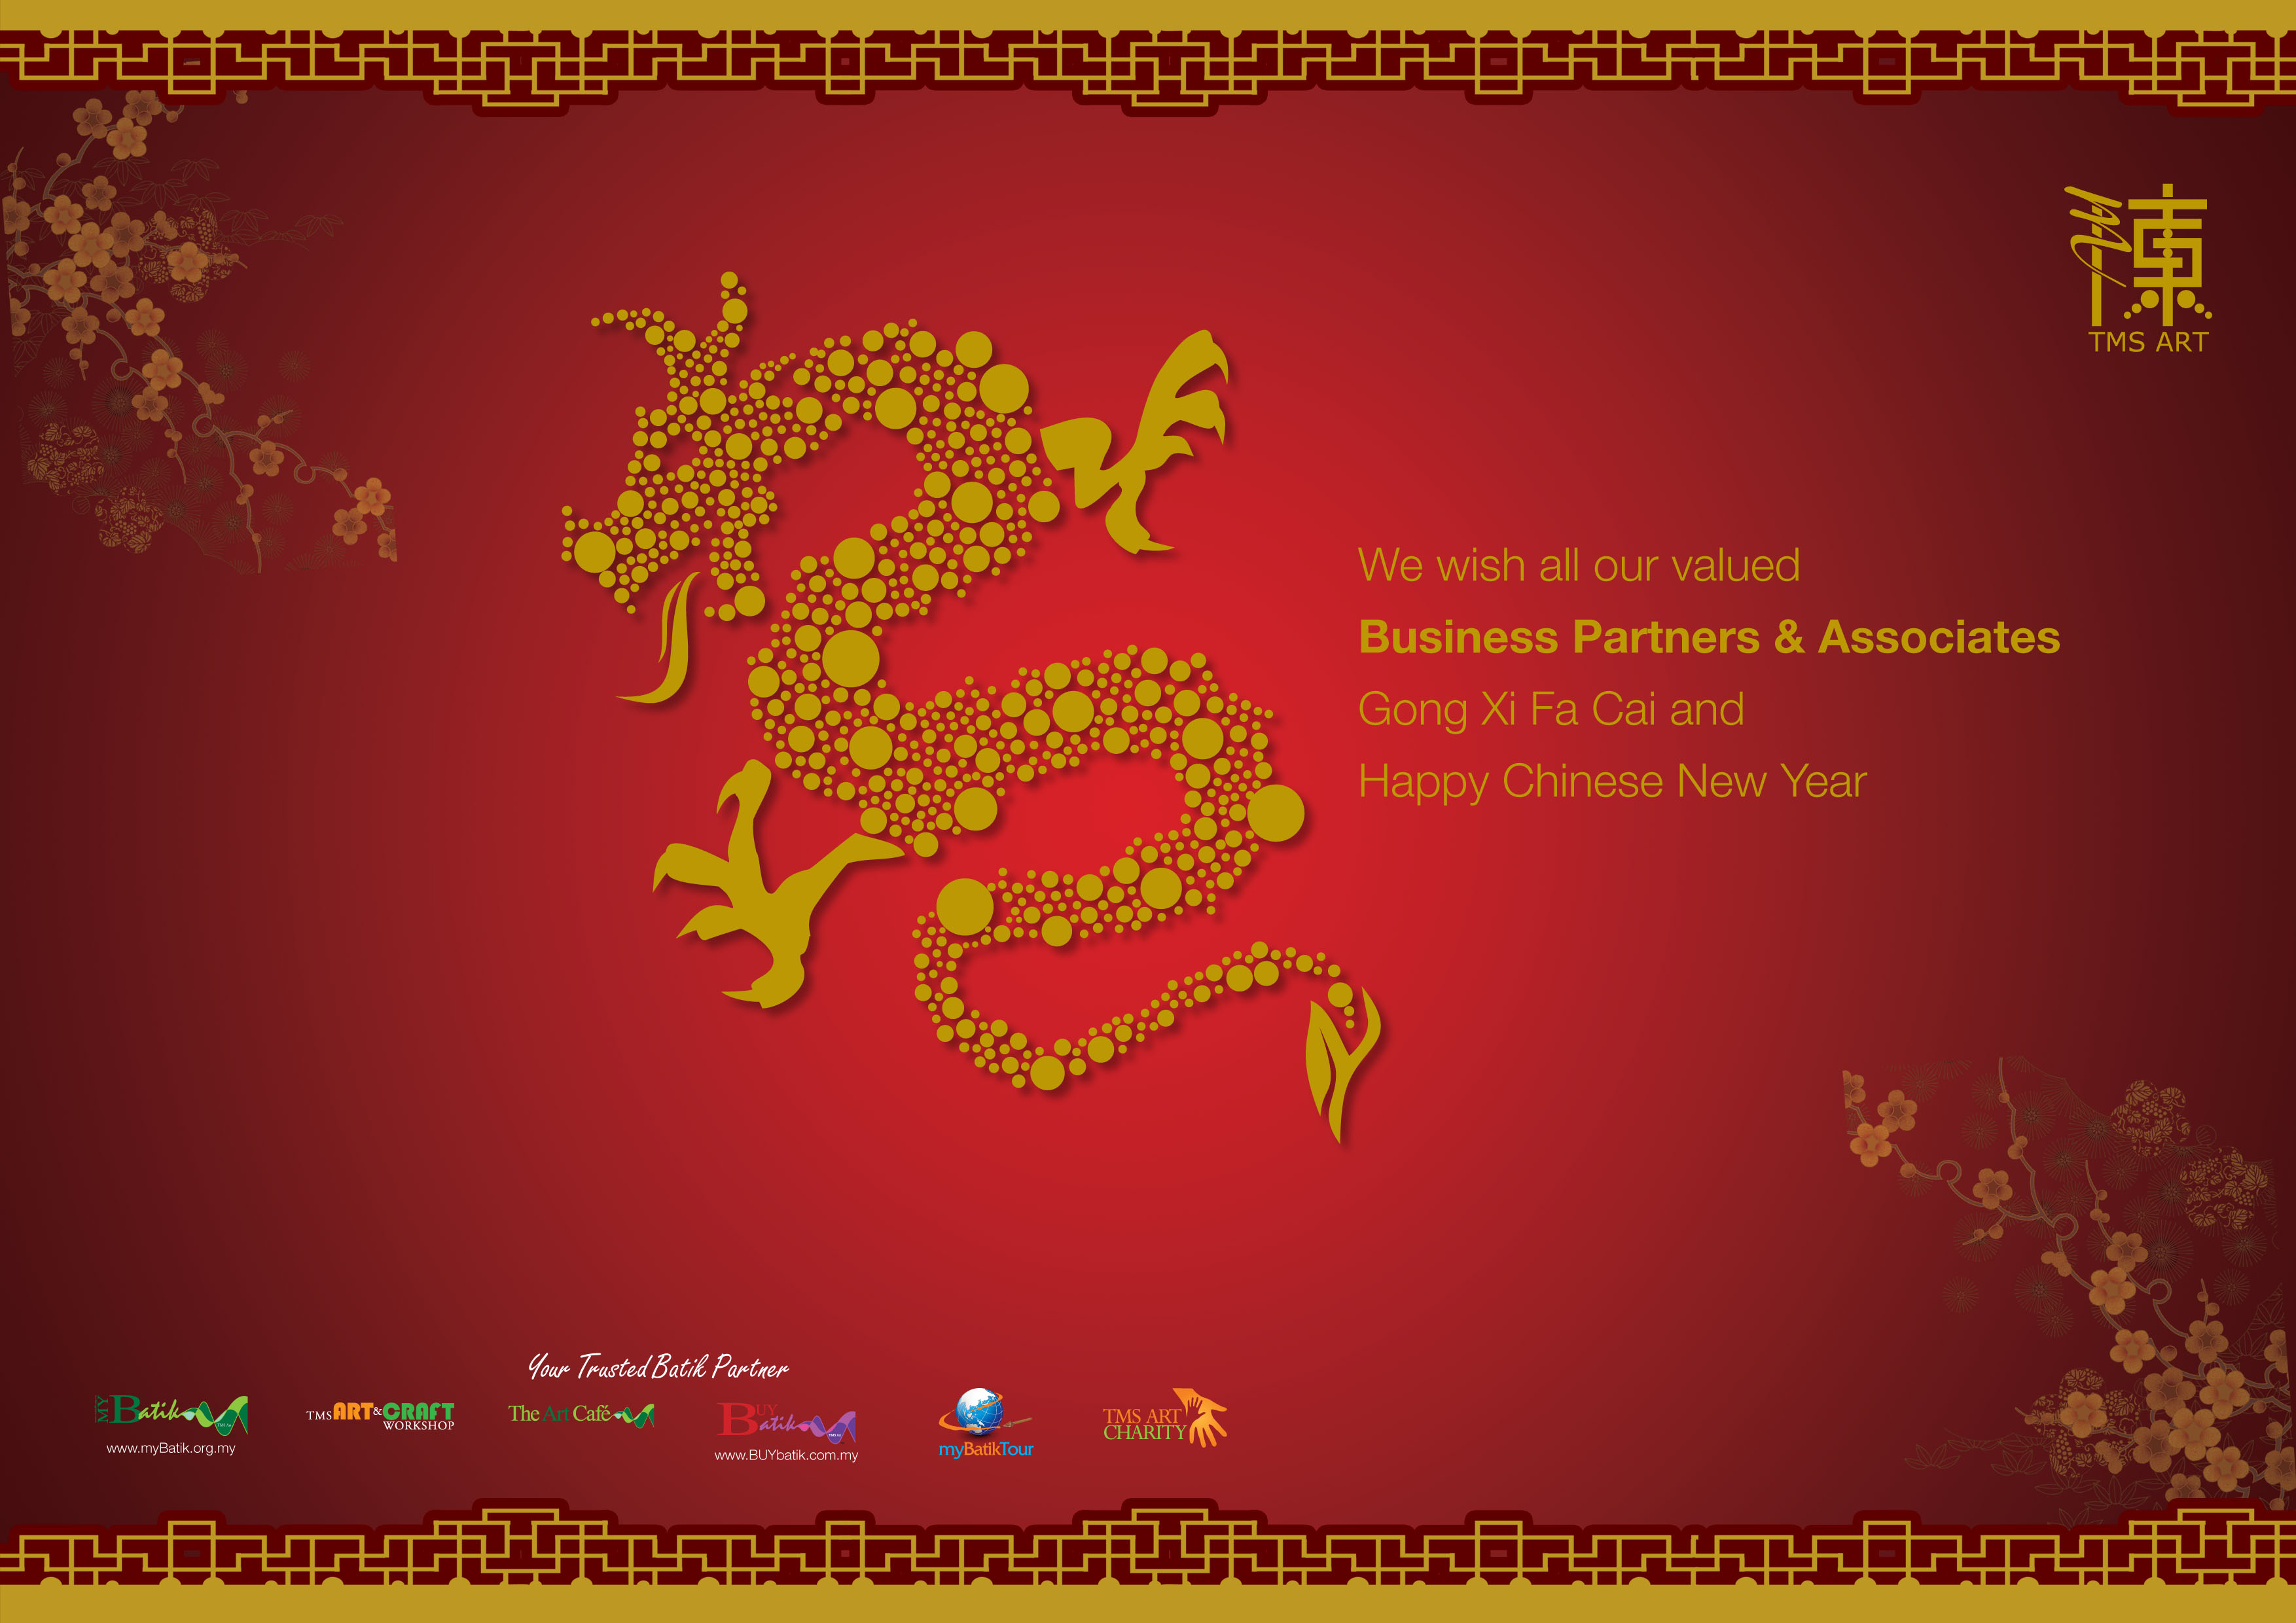 Happy Chinese Near Year 2012. We still open as usual, welcome to visit us. RSVP call 03-26935154